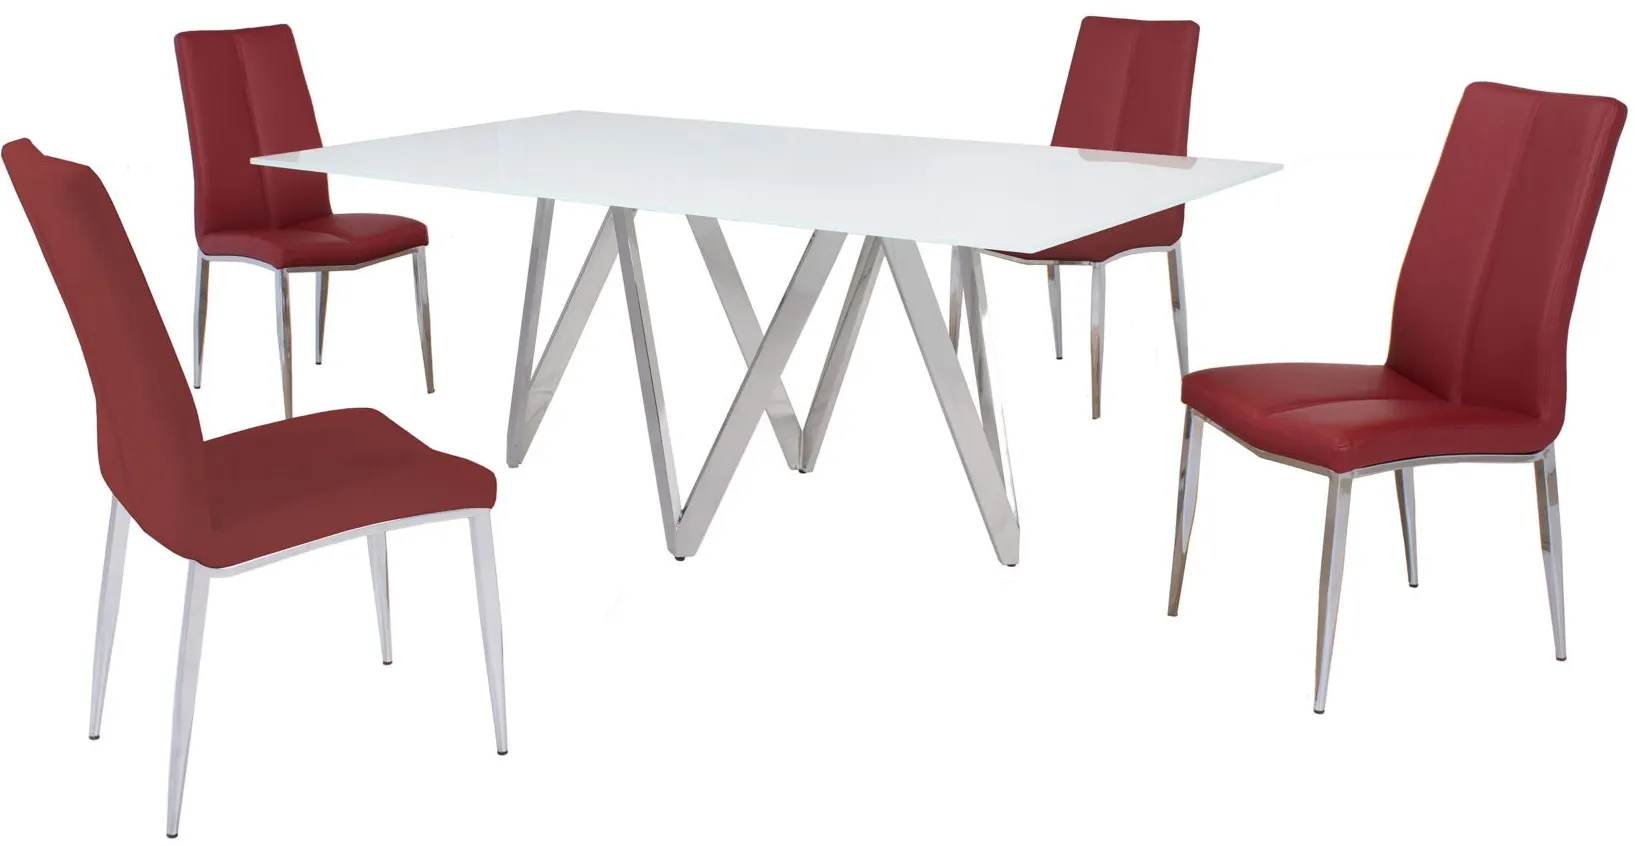 Abigail 5-pc. Dining Set in Red by Chintaly Imports